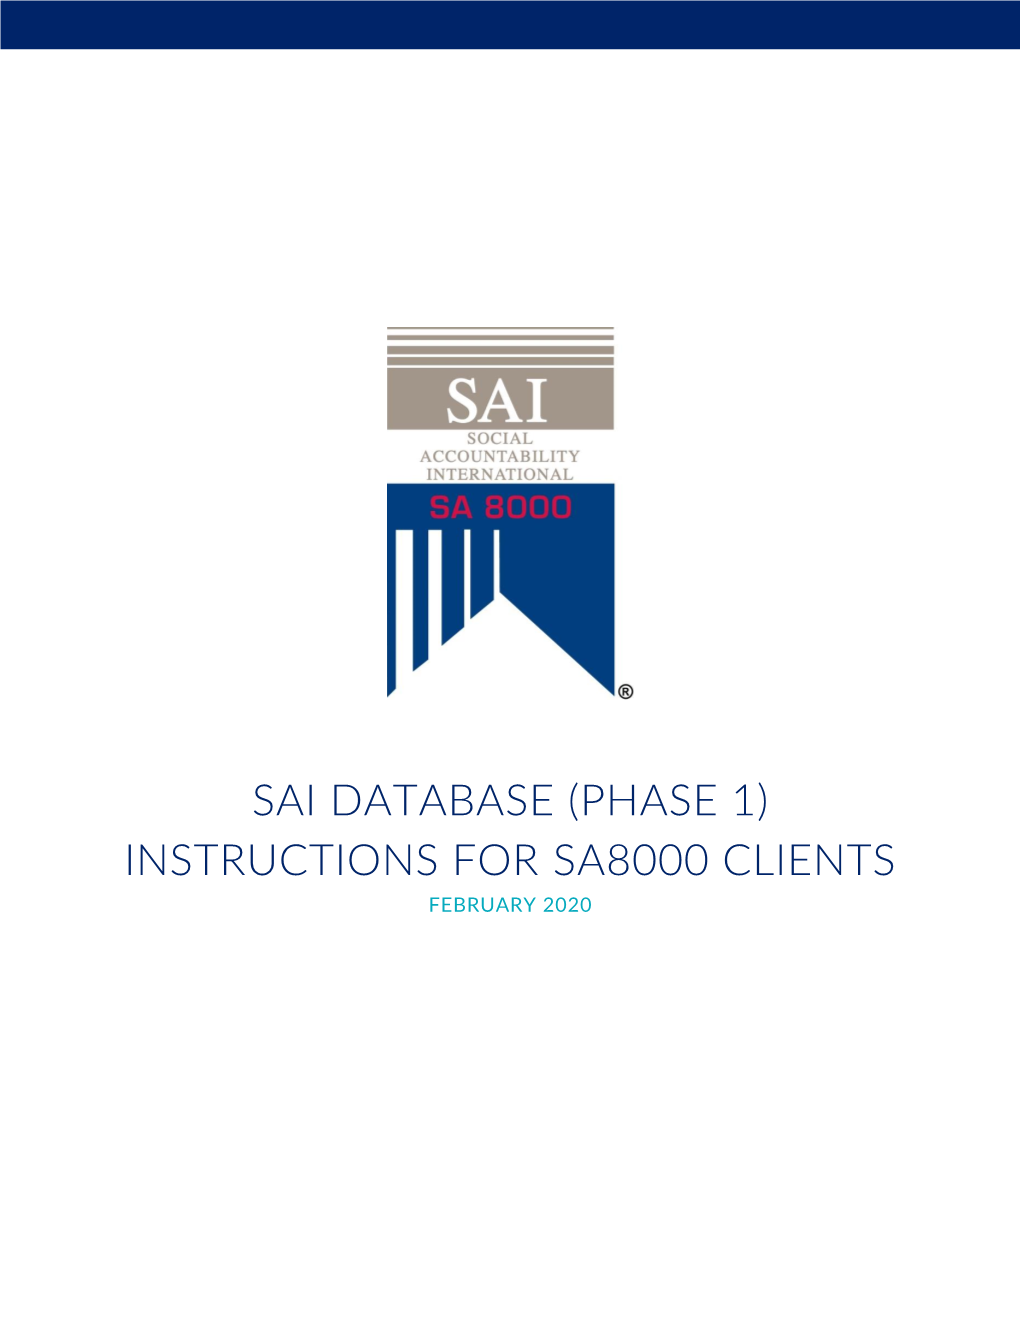 Sai Database (Phase 1) Instructions for Sa8000 Clients February 2020